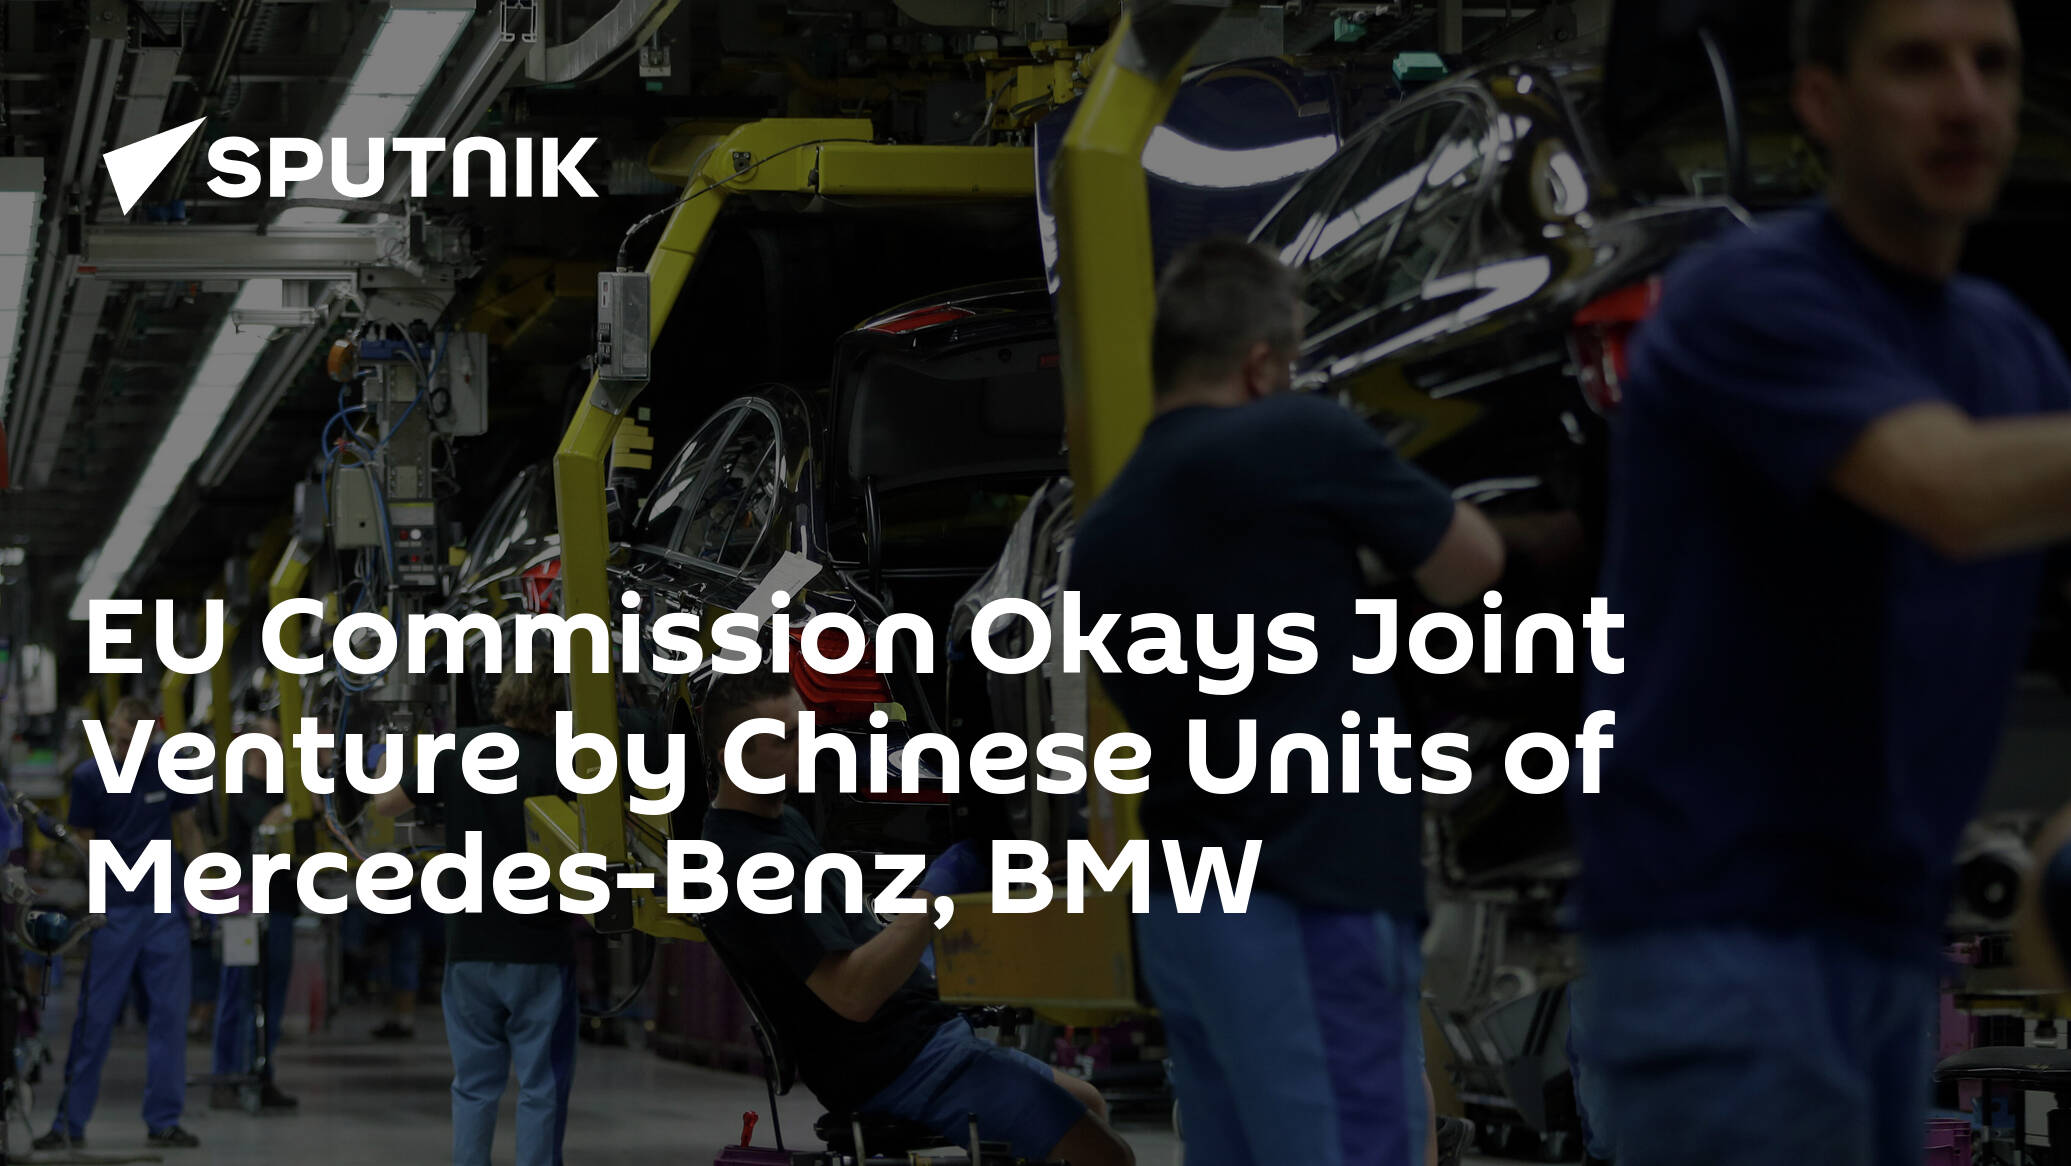 EU Commission Okays Joint Venture by Chinese Units of Mercedes-Benz, BMW